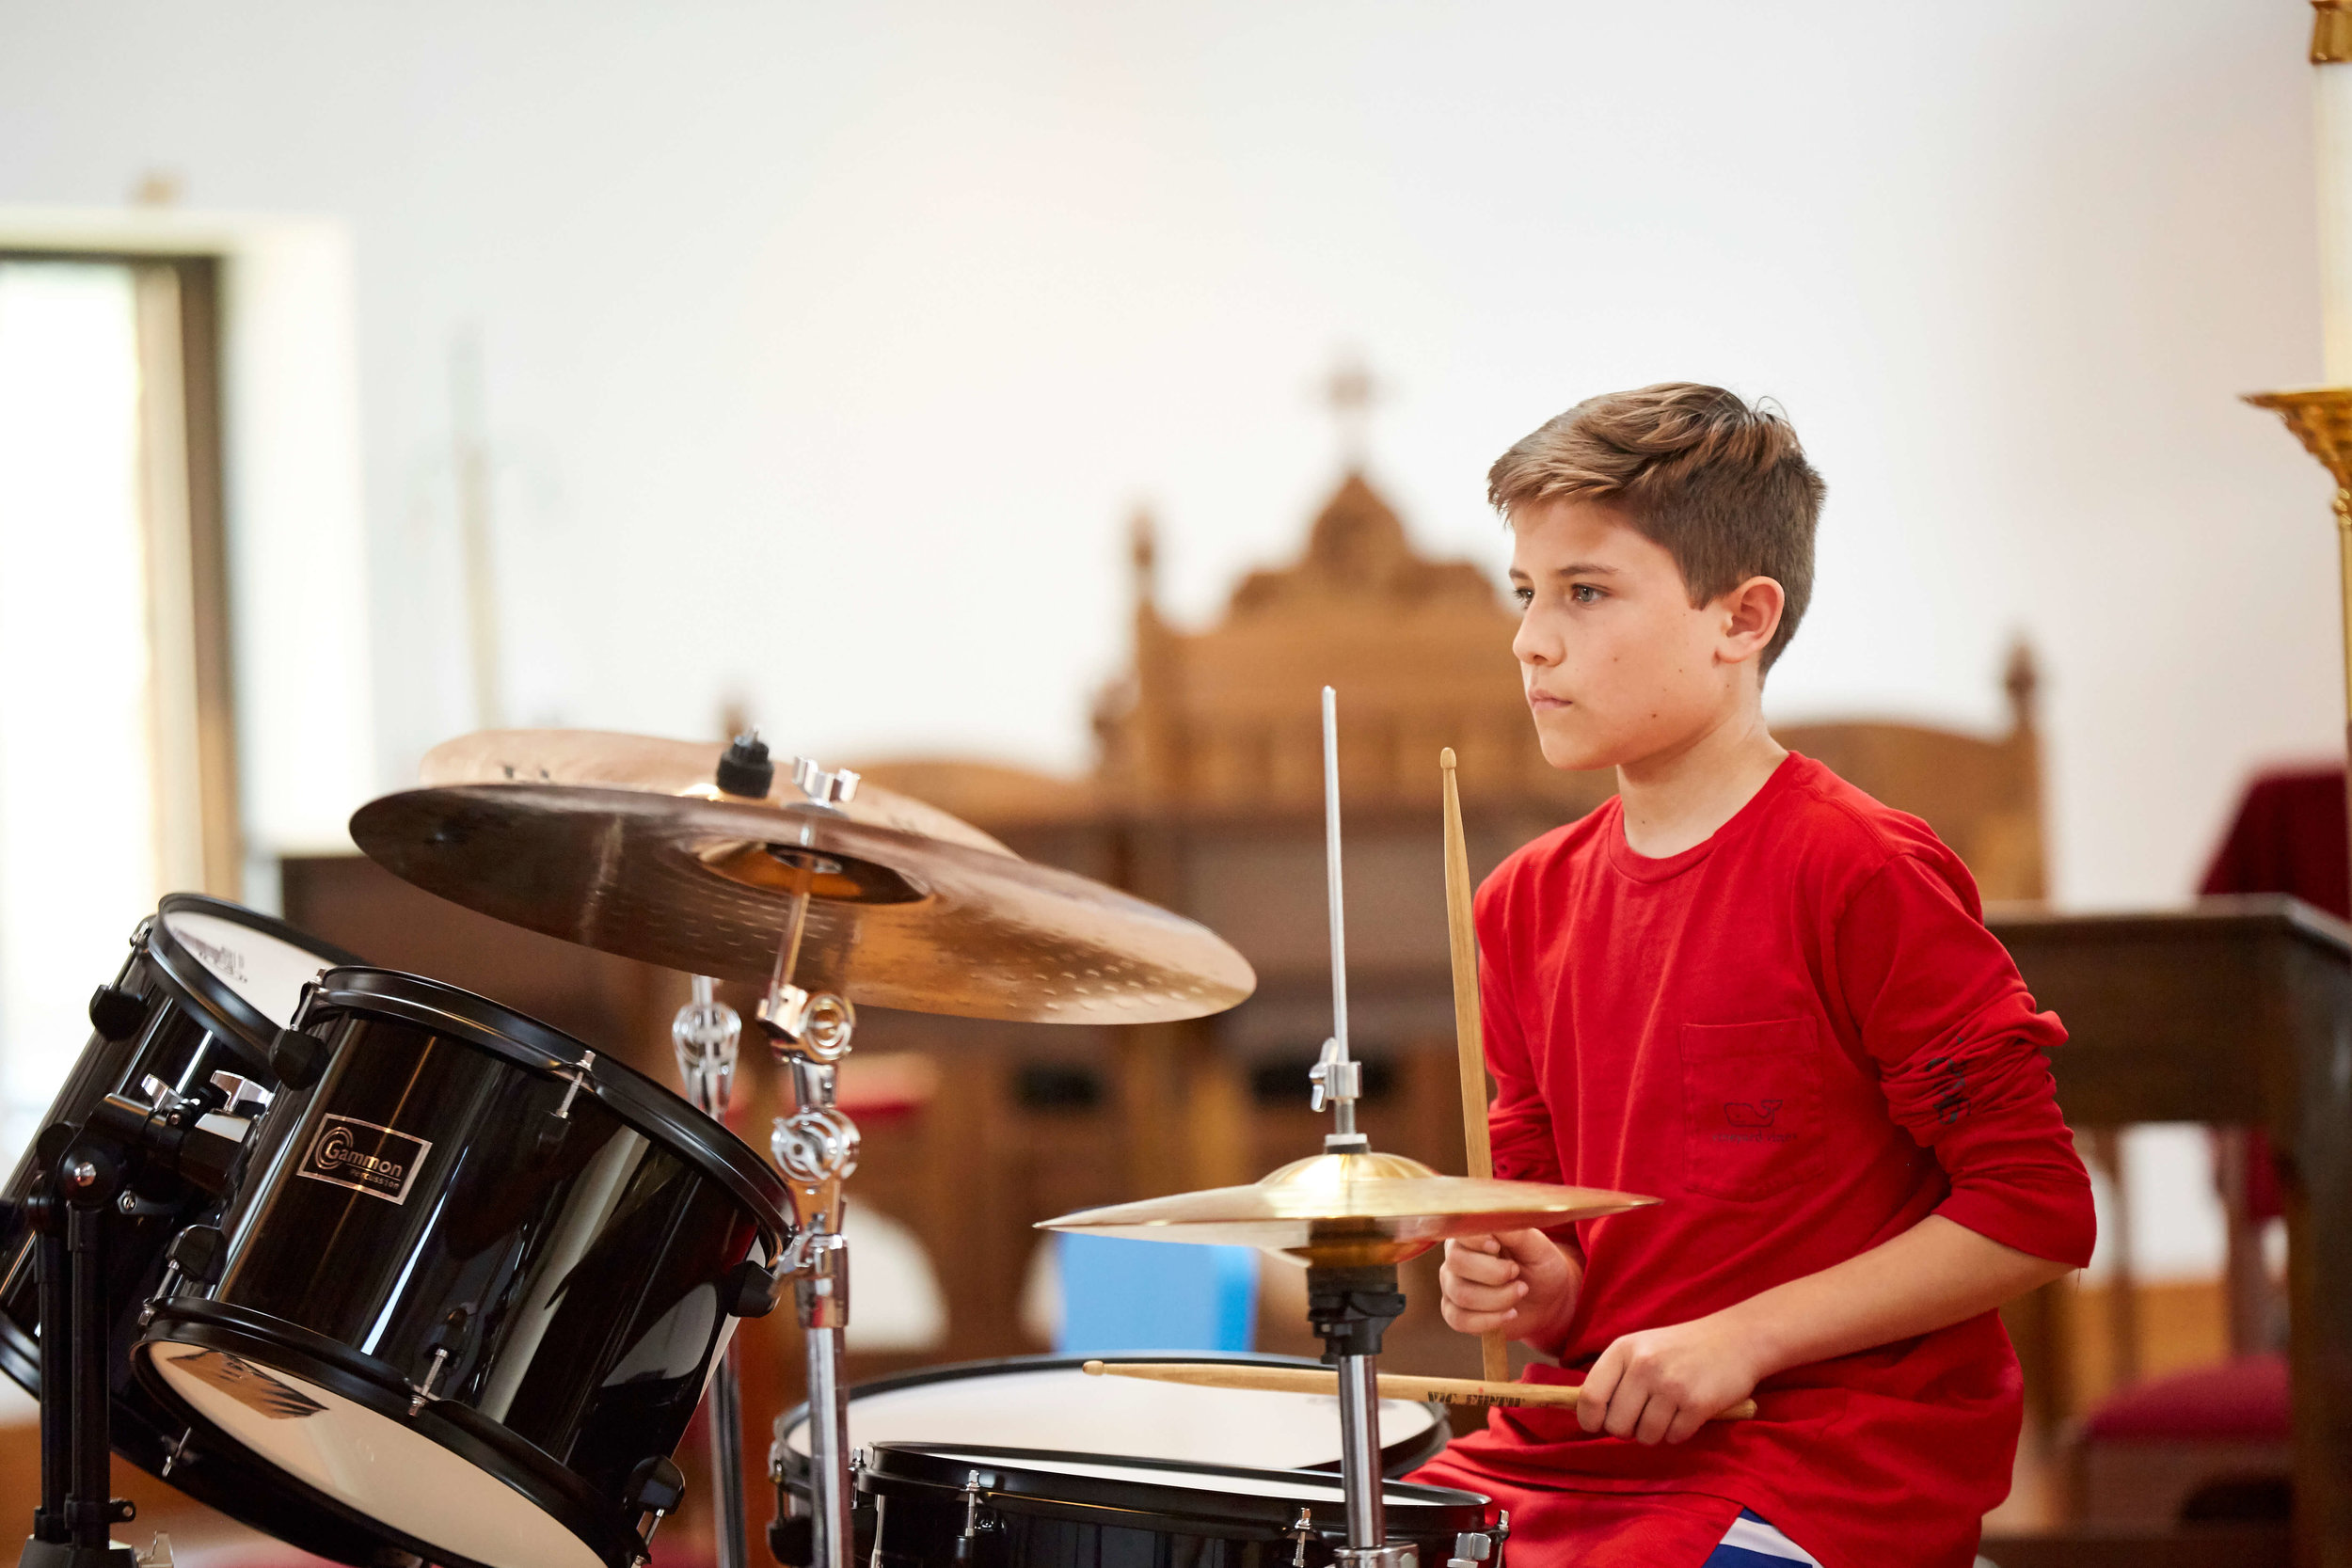   DRUM LESSONS IN CINCINNATI, ANDERSON, &amp; MASON   for beginner, intermediate, and advanced students of all ages  CALL  513-560-9175  TODAY TO SCHEDULE YOUR FIRST LESSON   Request Info  